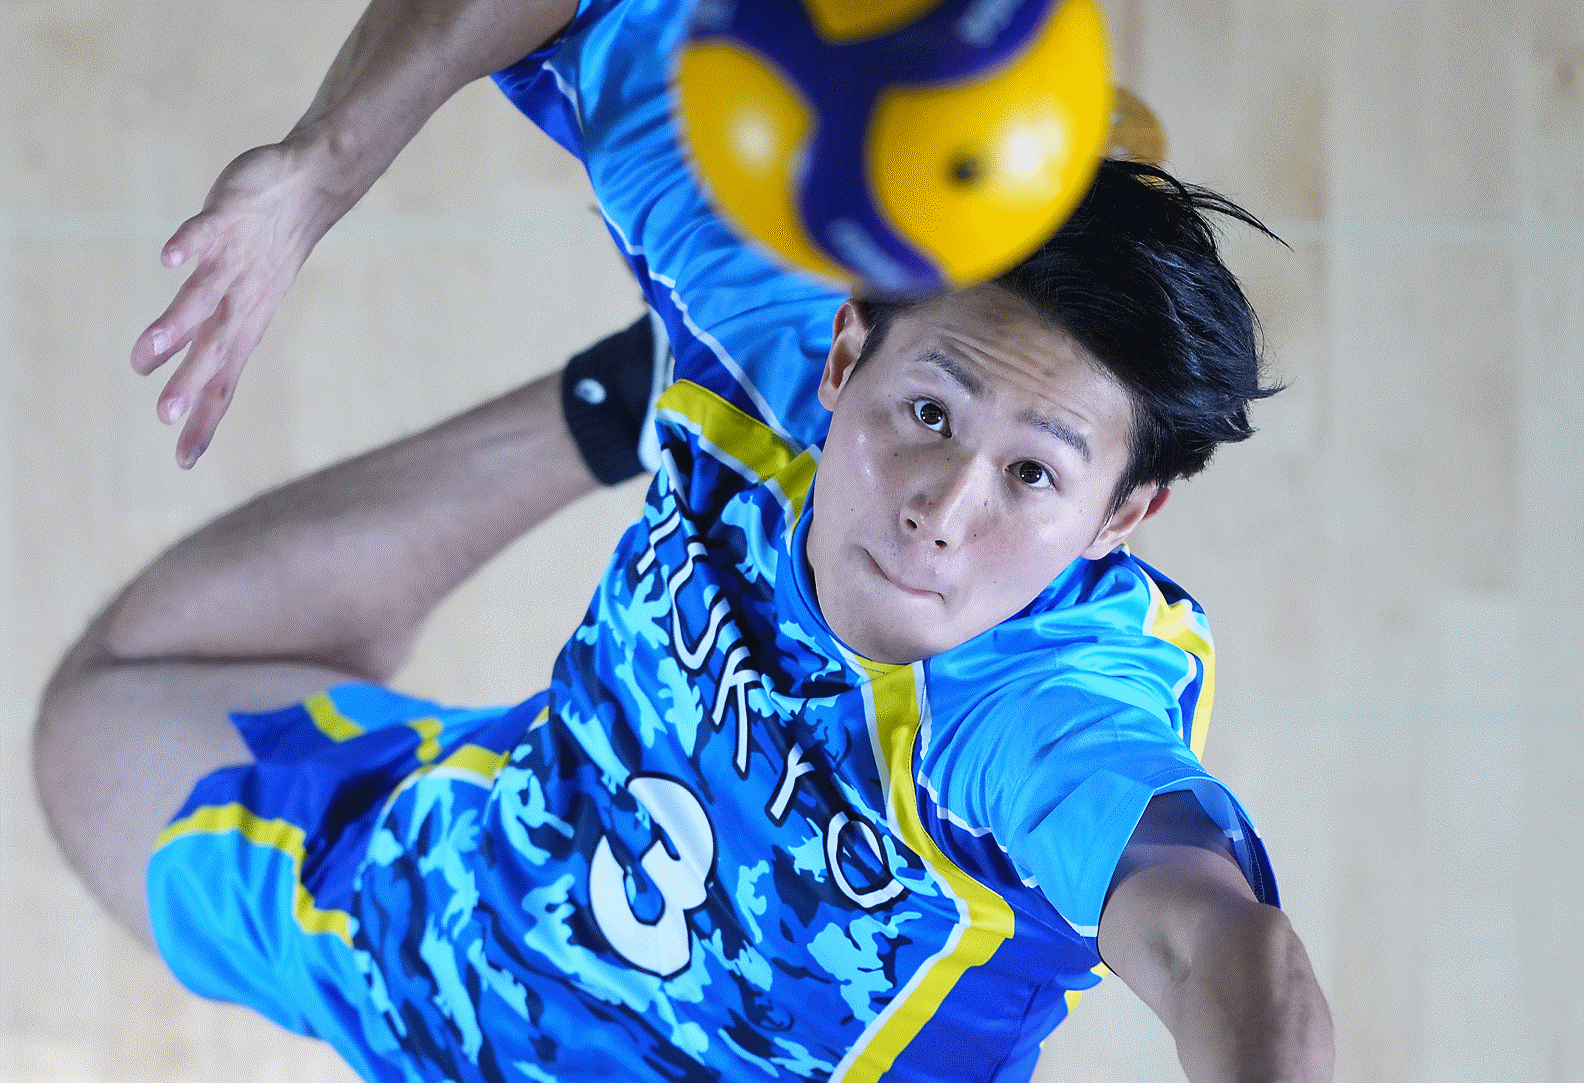 Volleyball player serving